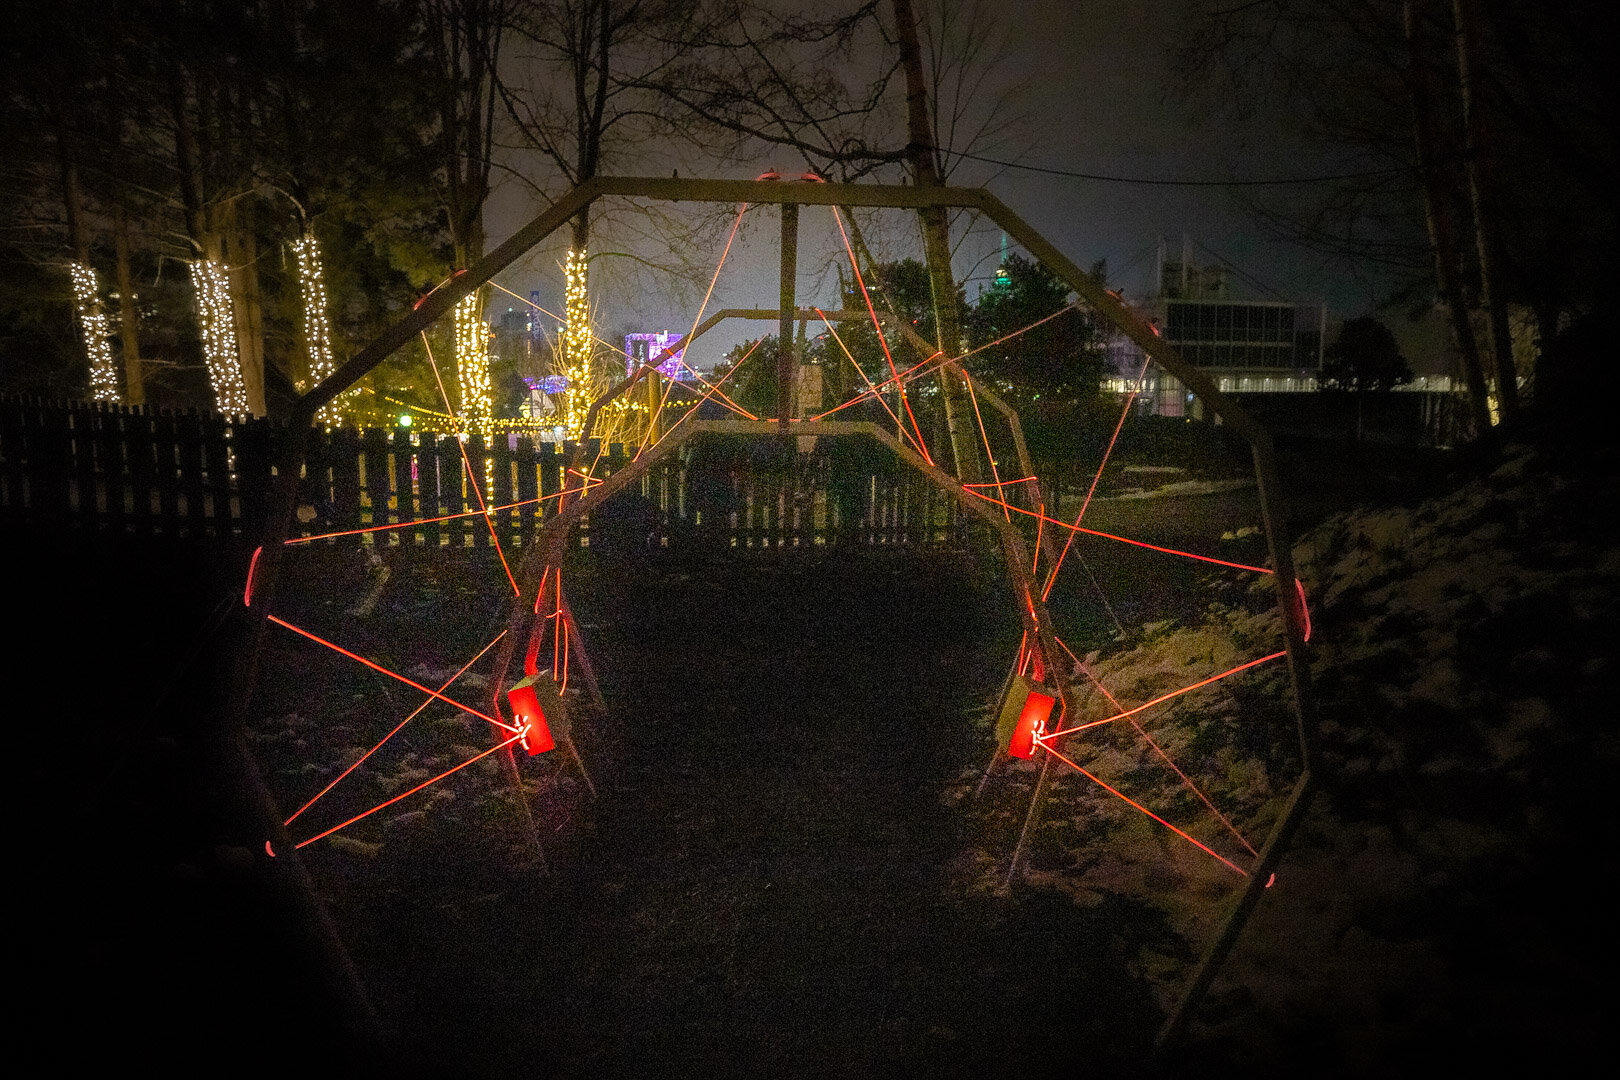  As we followed the trail, we came across a metal enclosure with red glowing strings.  This was one of the most popular spots for people and dogs to pass through. It was difficult to get a photo not only because of the traffic but it was also windy w